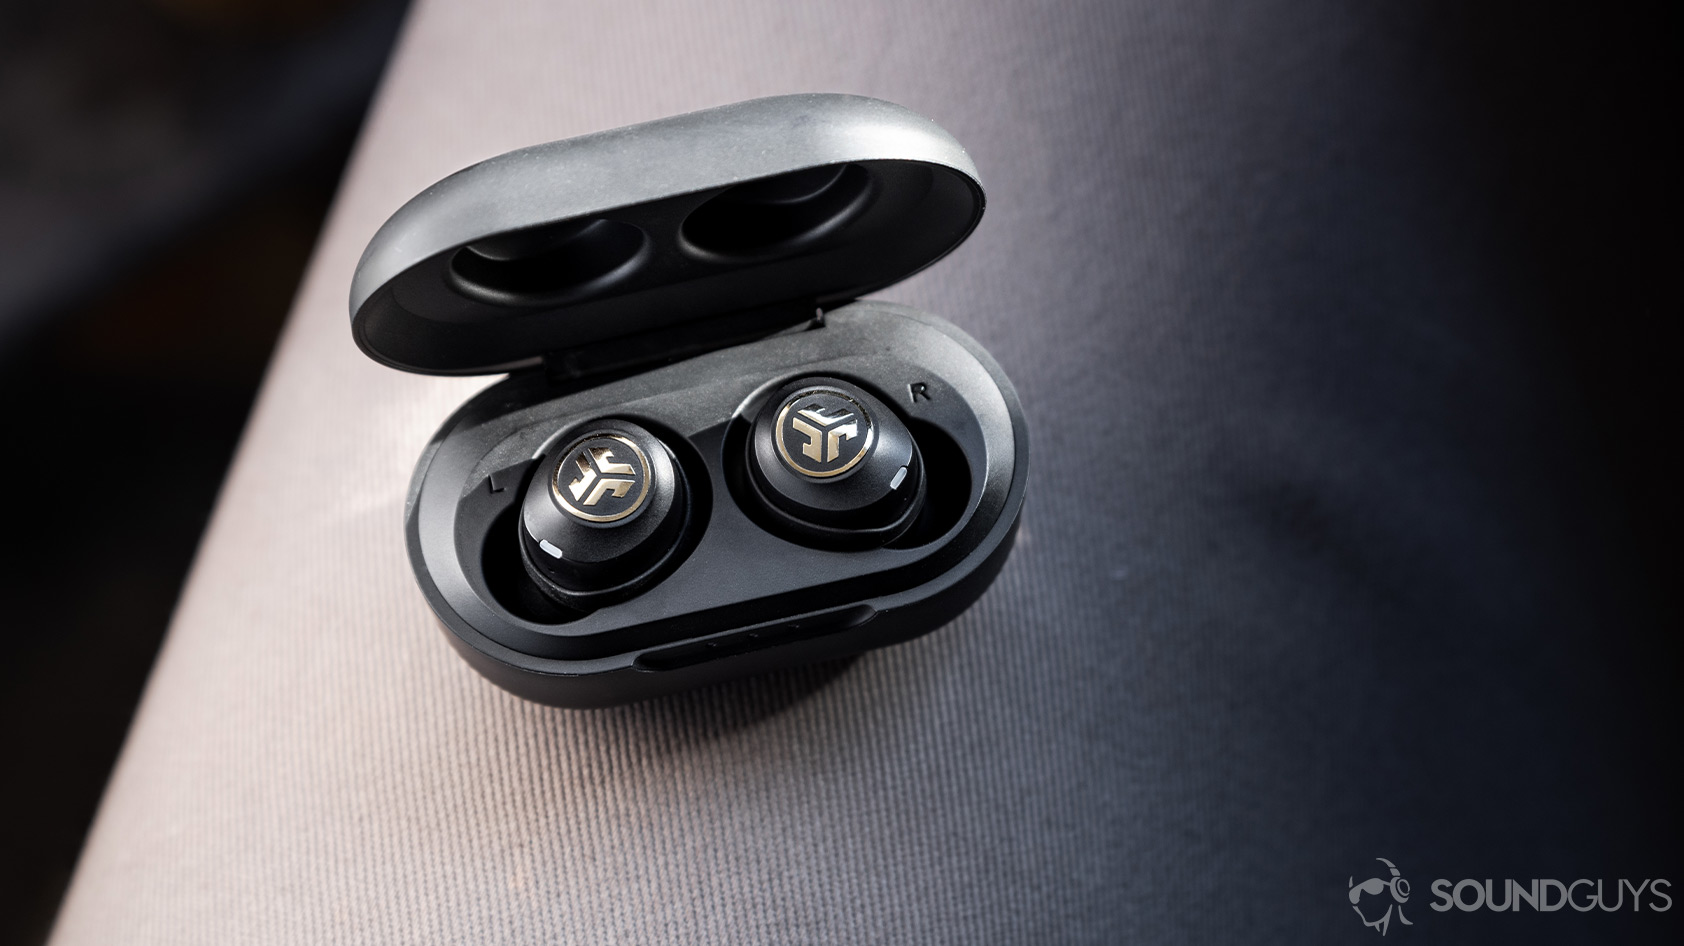 An aerial picture of the JLab JBuds Air Icon true wireless earbuds in the charging case.